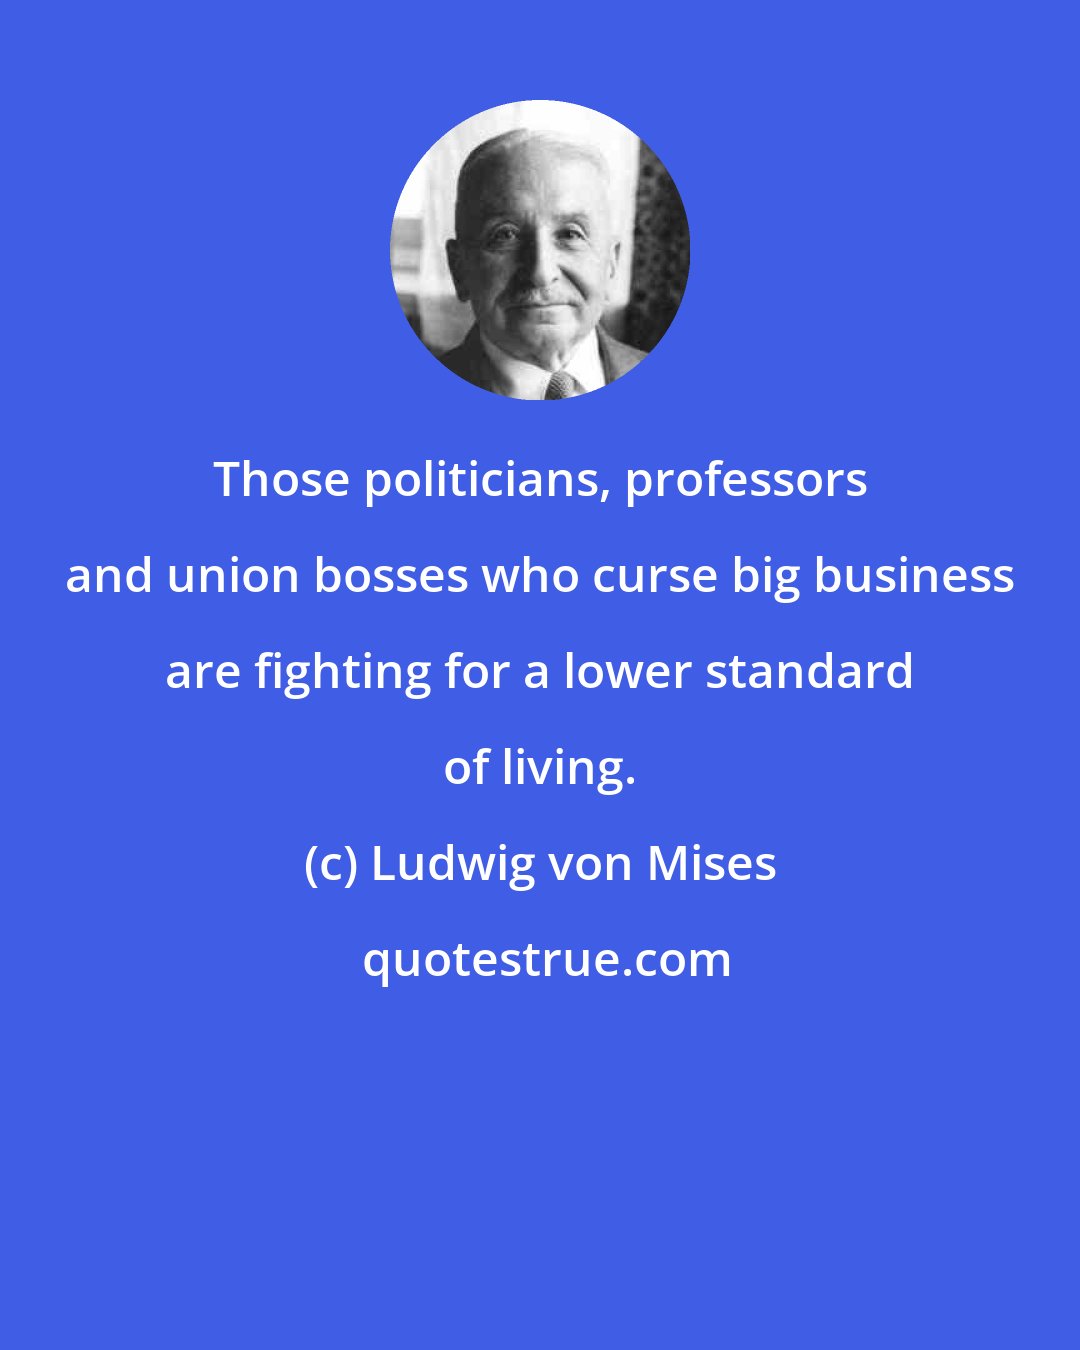 Ludwig von Mises: Those politicians, professors and union bosses who curse big business are fighting for a lower standard of living.